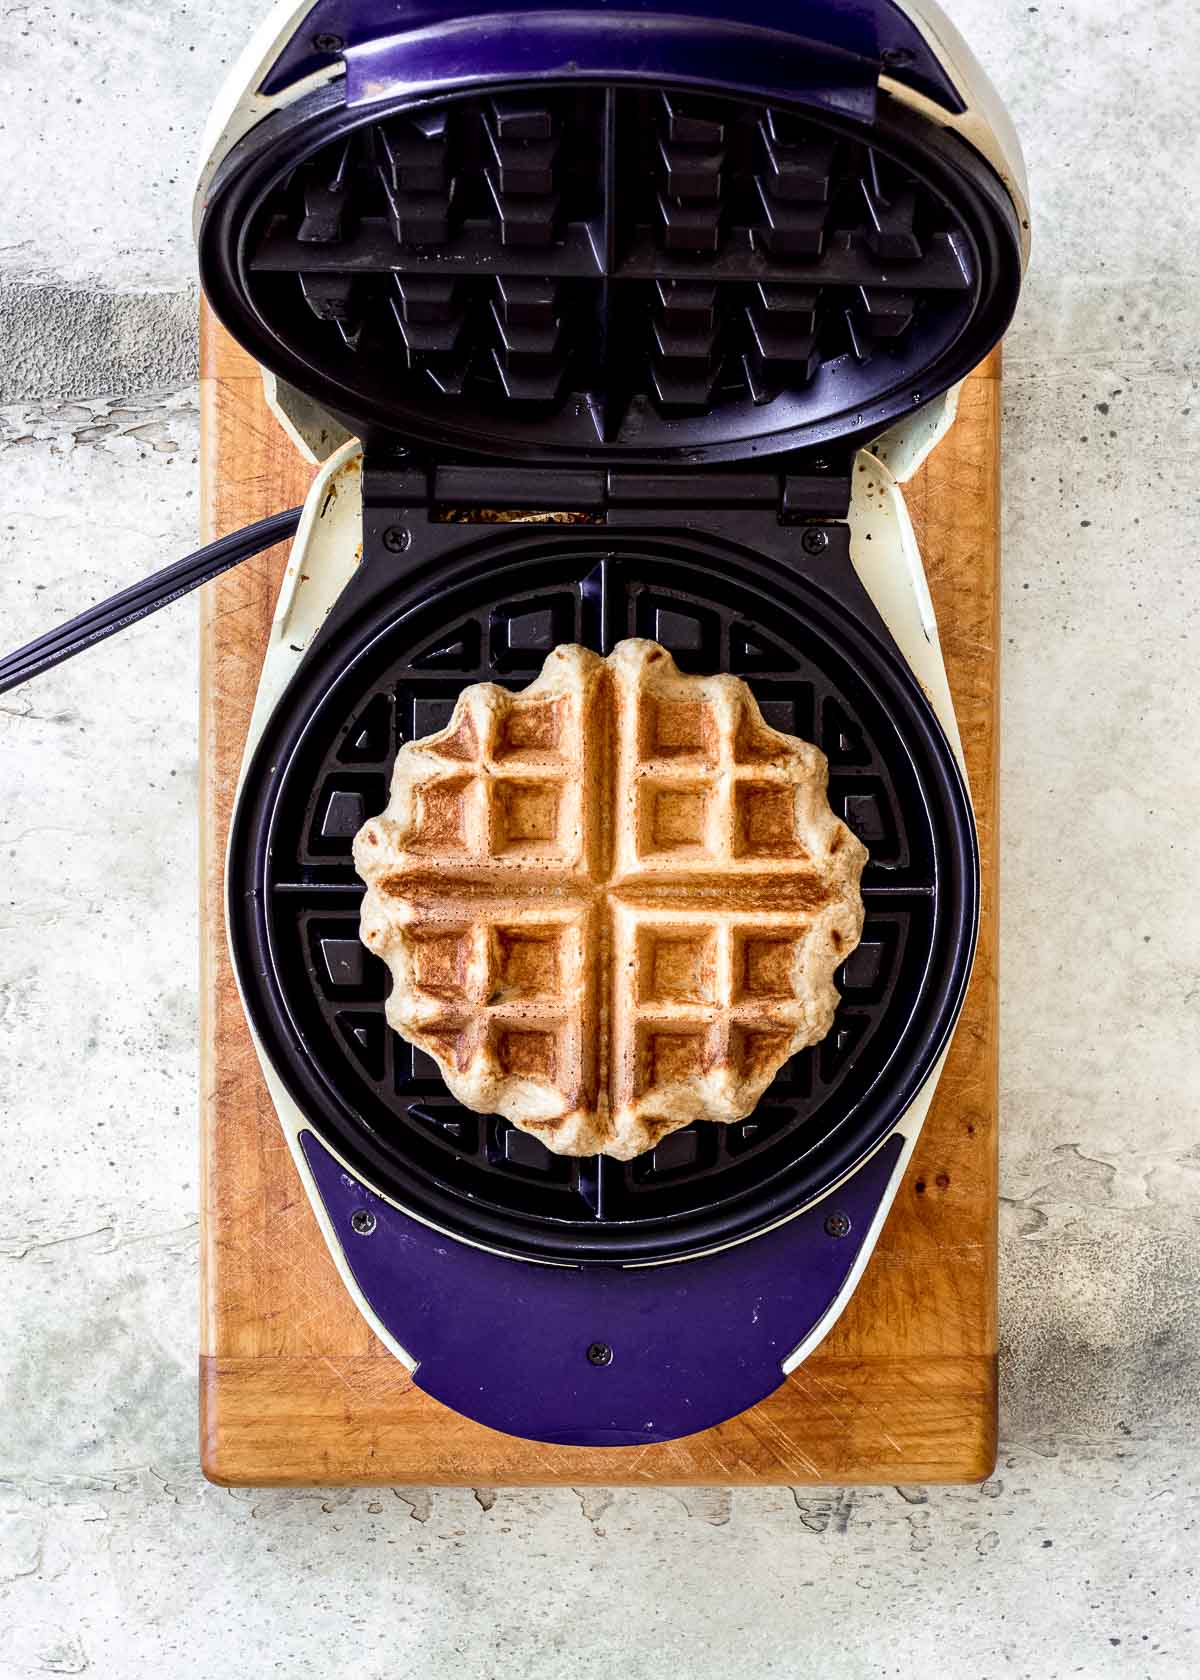 Cooked vegan waffle sits in a waffle iron, ready to be removed.